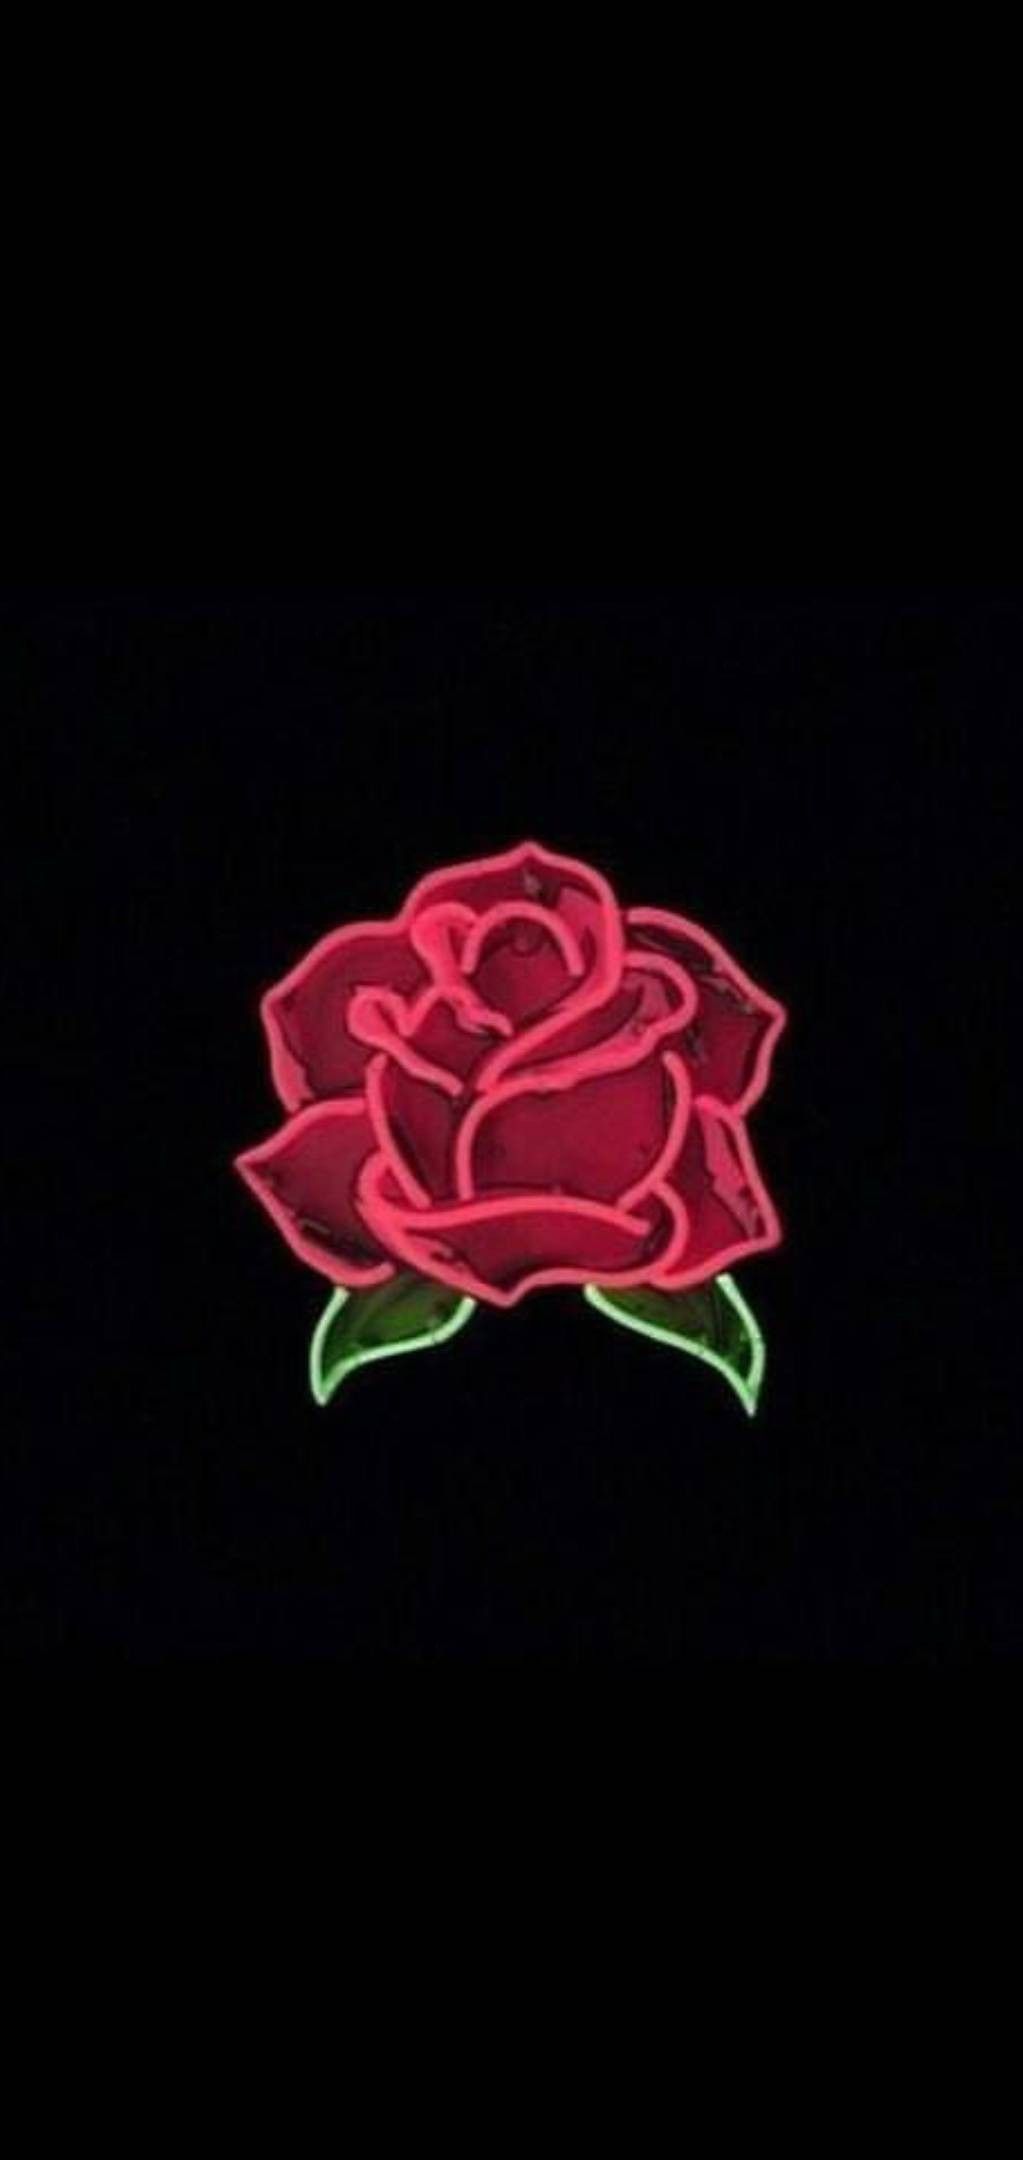 Aesthetic wallpaper with a neon rose on a black background - Cool